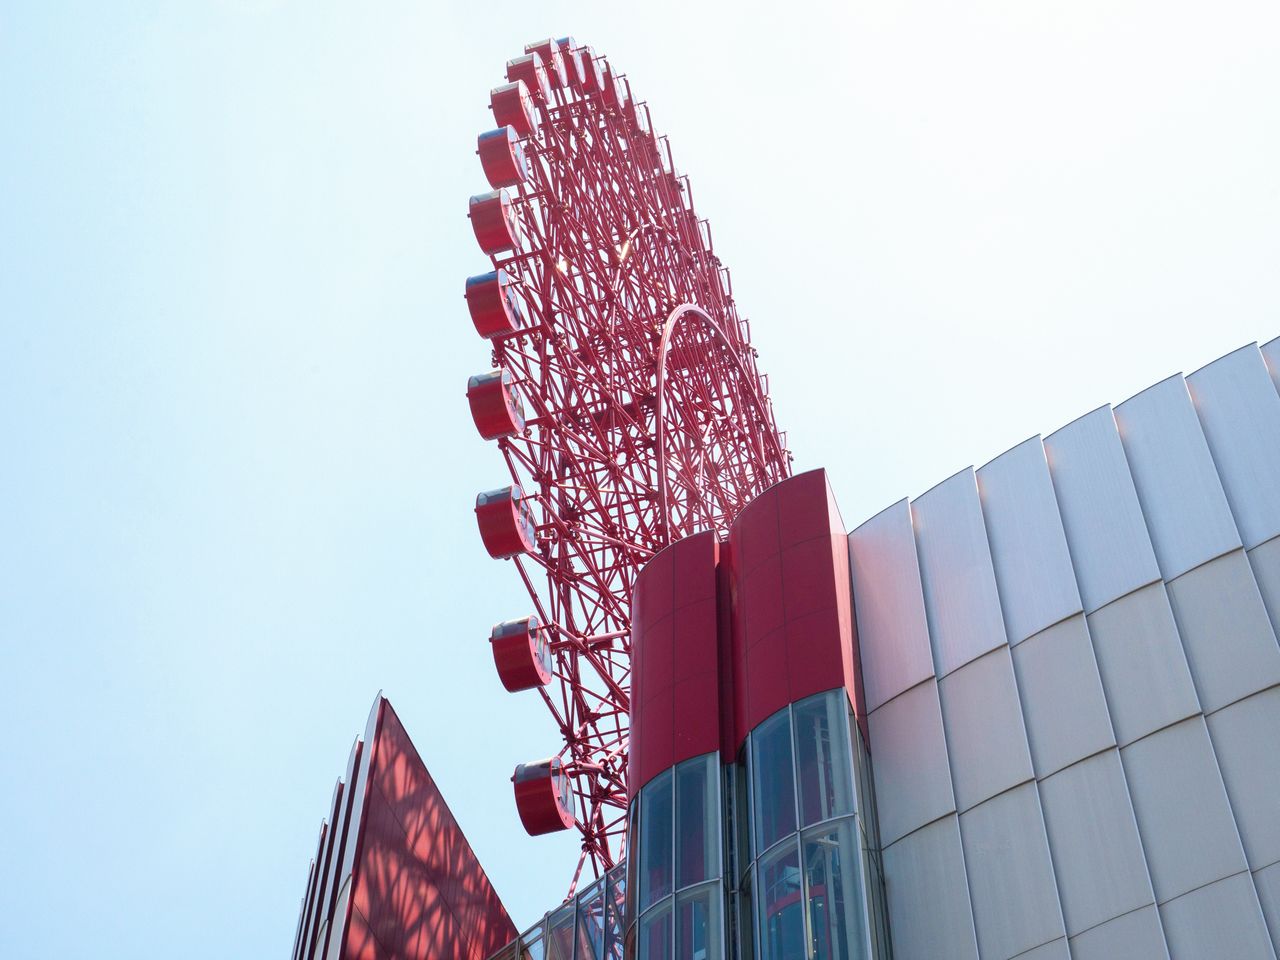 The red Ferris wheel on top of Hep Five is a landmark for both Umeda and the Kita area.